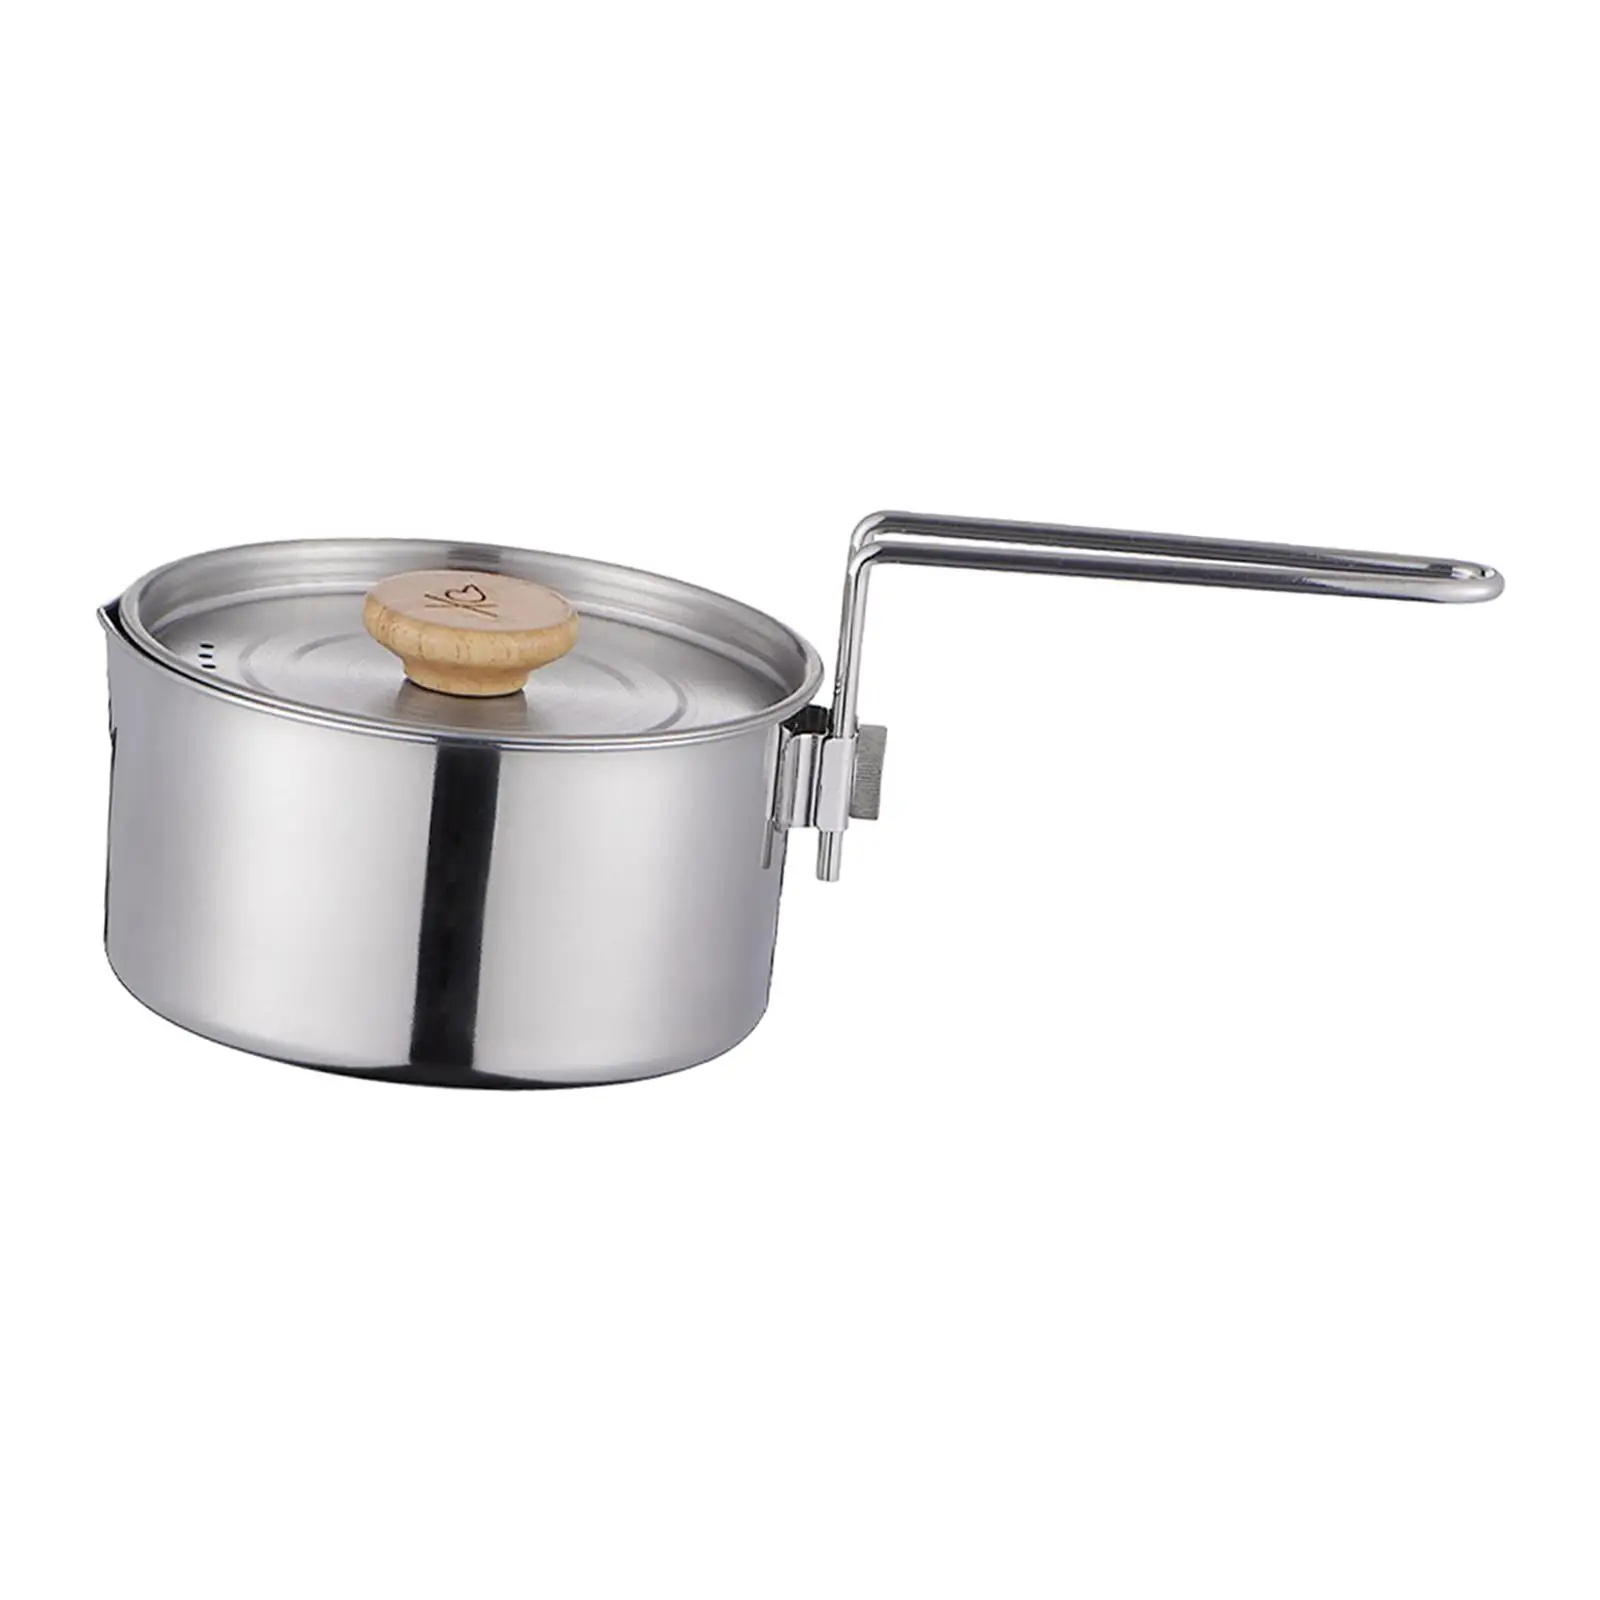 Stainless Steel Cooking Pot Multifunctional Pot Outdoor Kettle Cookware for Picnic